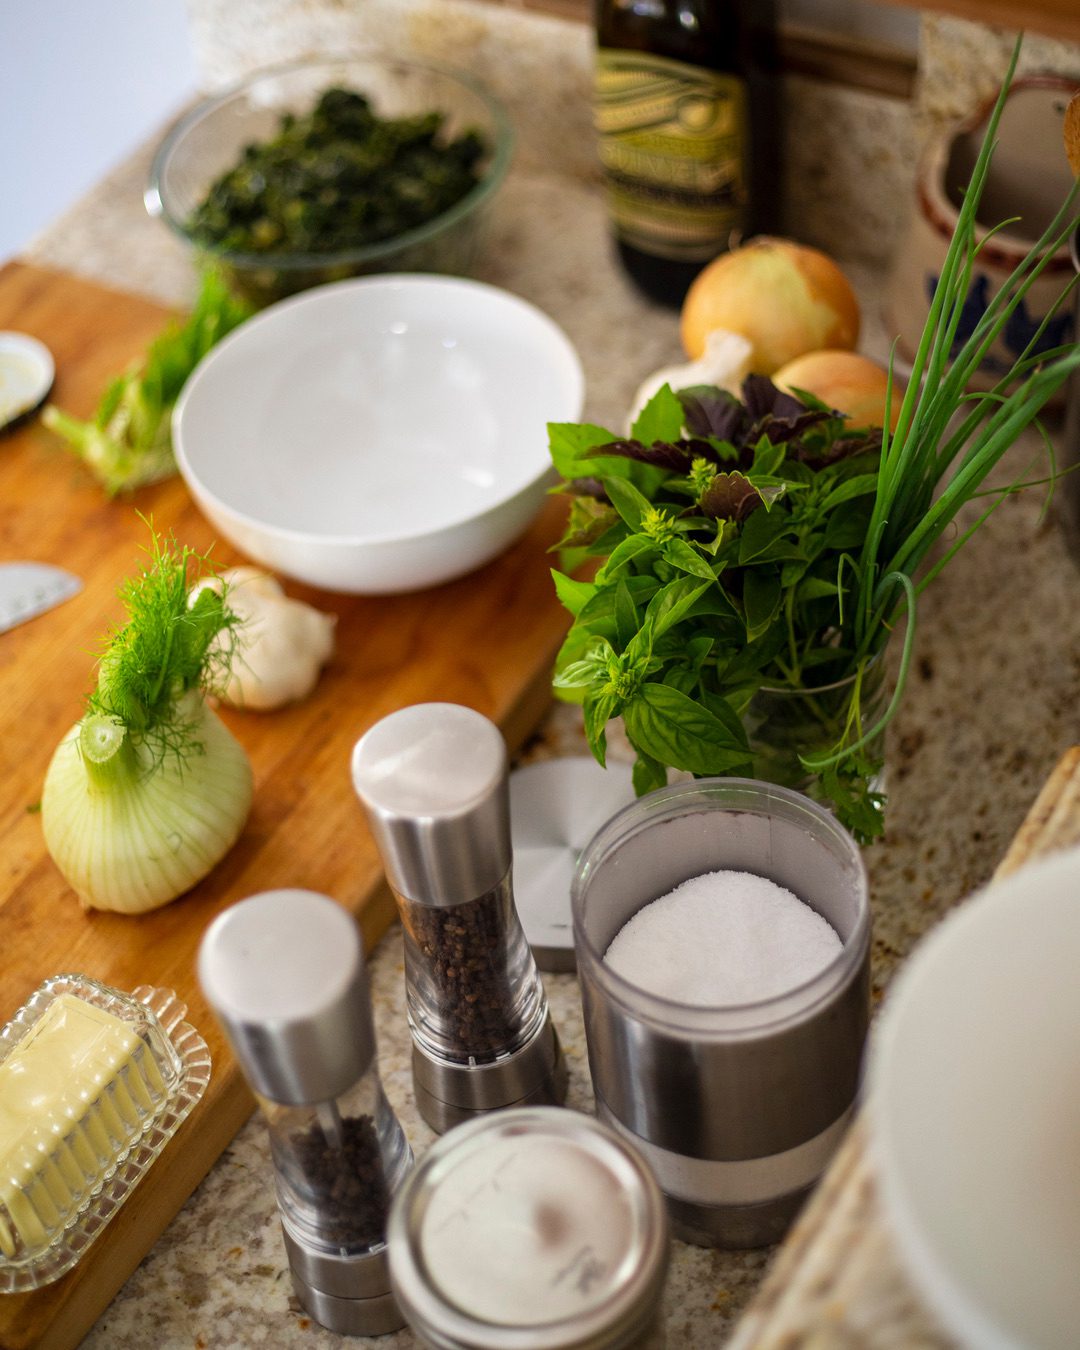 Ingredients for fennel soup on cutting board